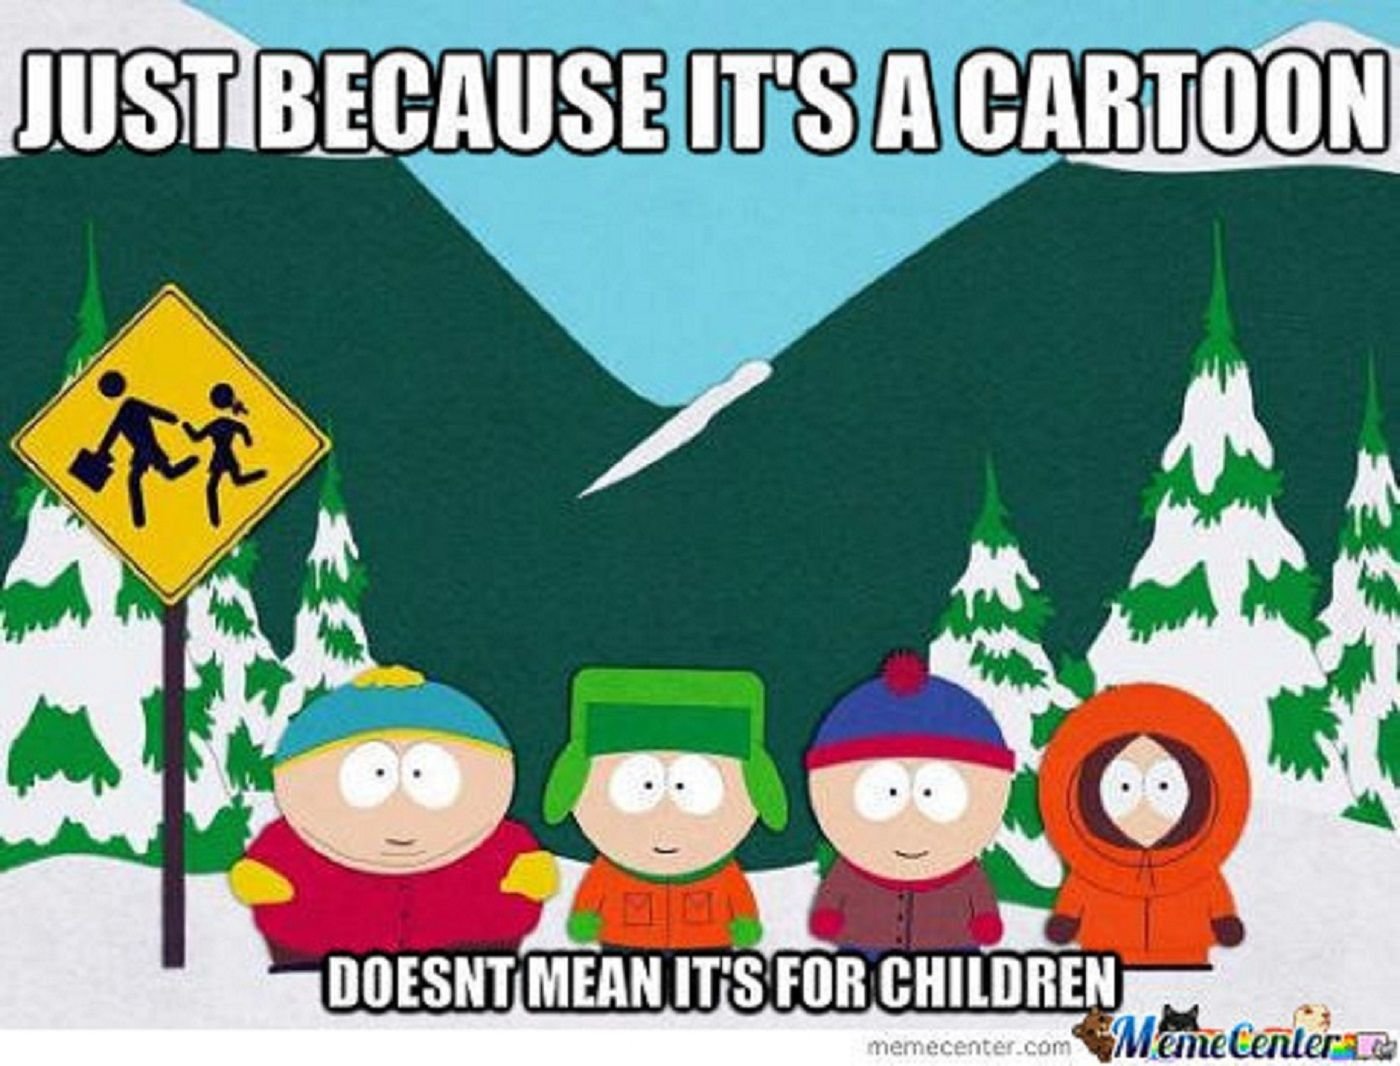 South-Park-Just-Because-its-a-cartoon-meme-does-not-mean-its-for-children-Meme.jpg